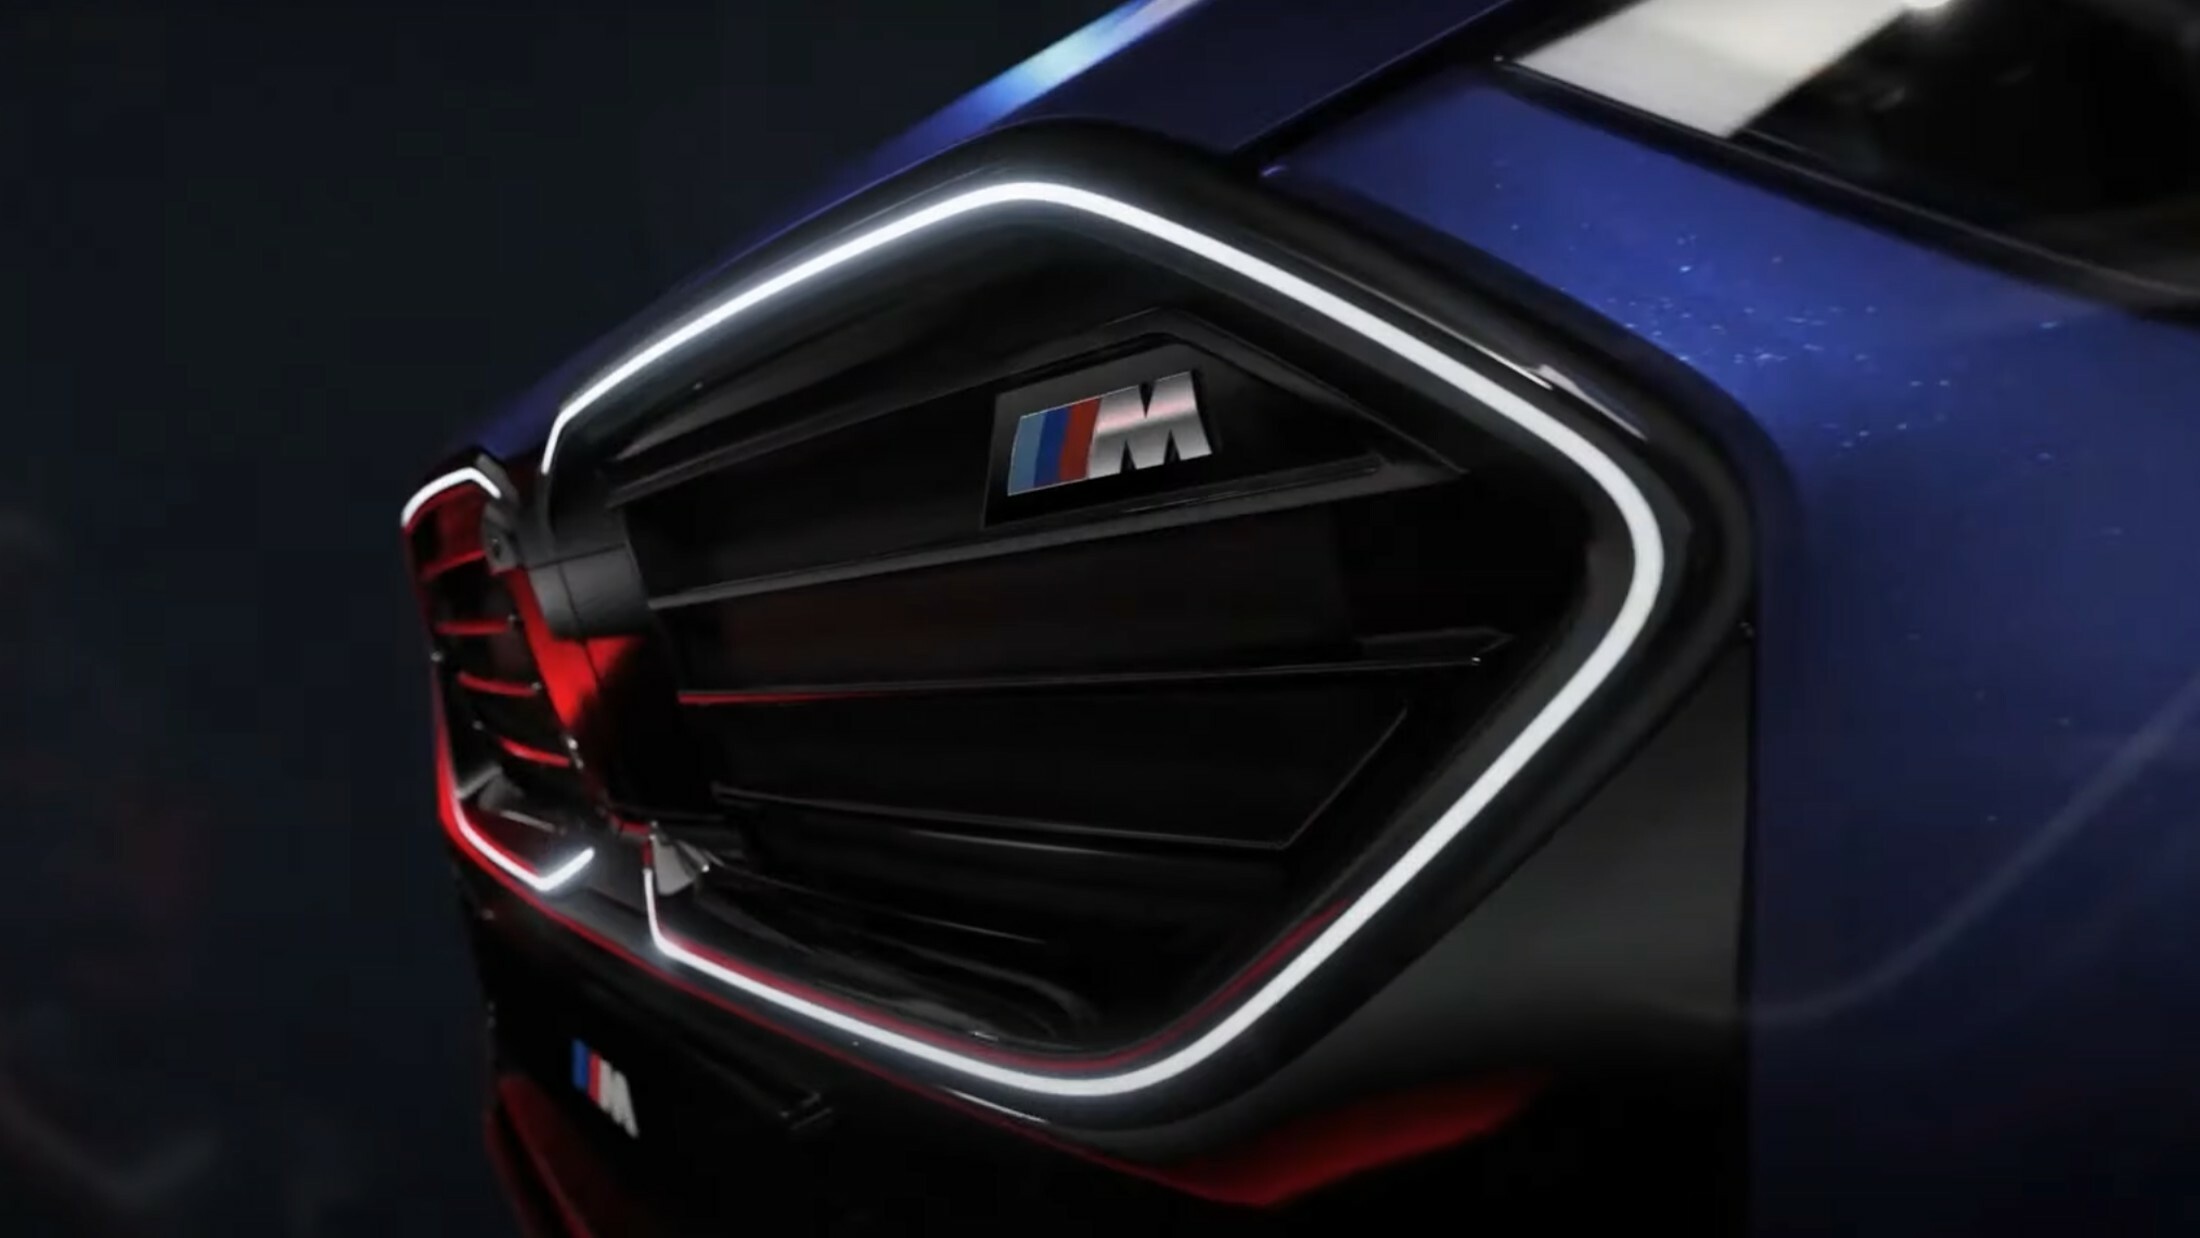 2024 BMW X2 M35i Teased Looking Mean As New iX2 EV Confirmed As Well